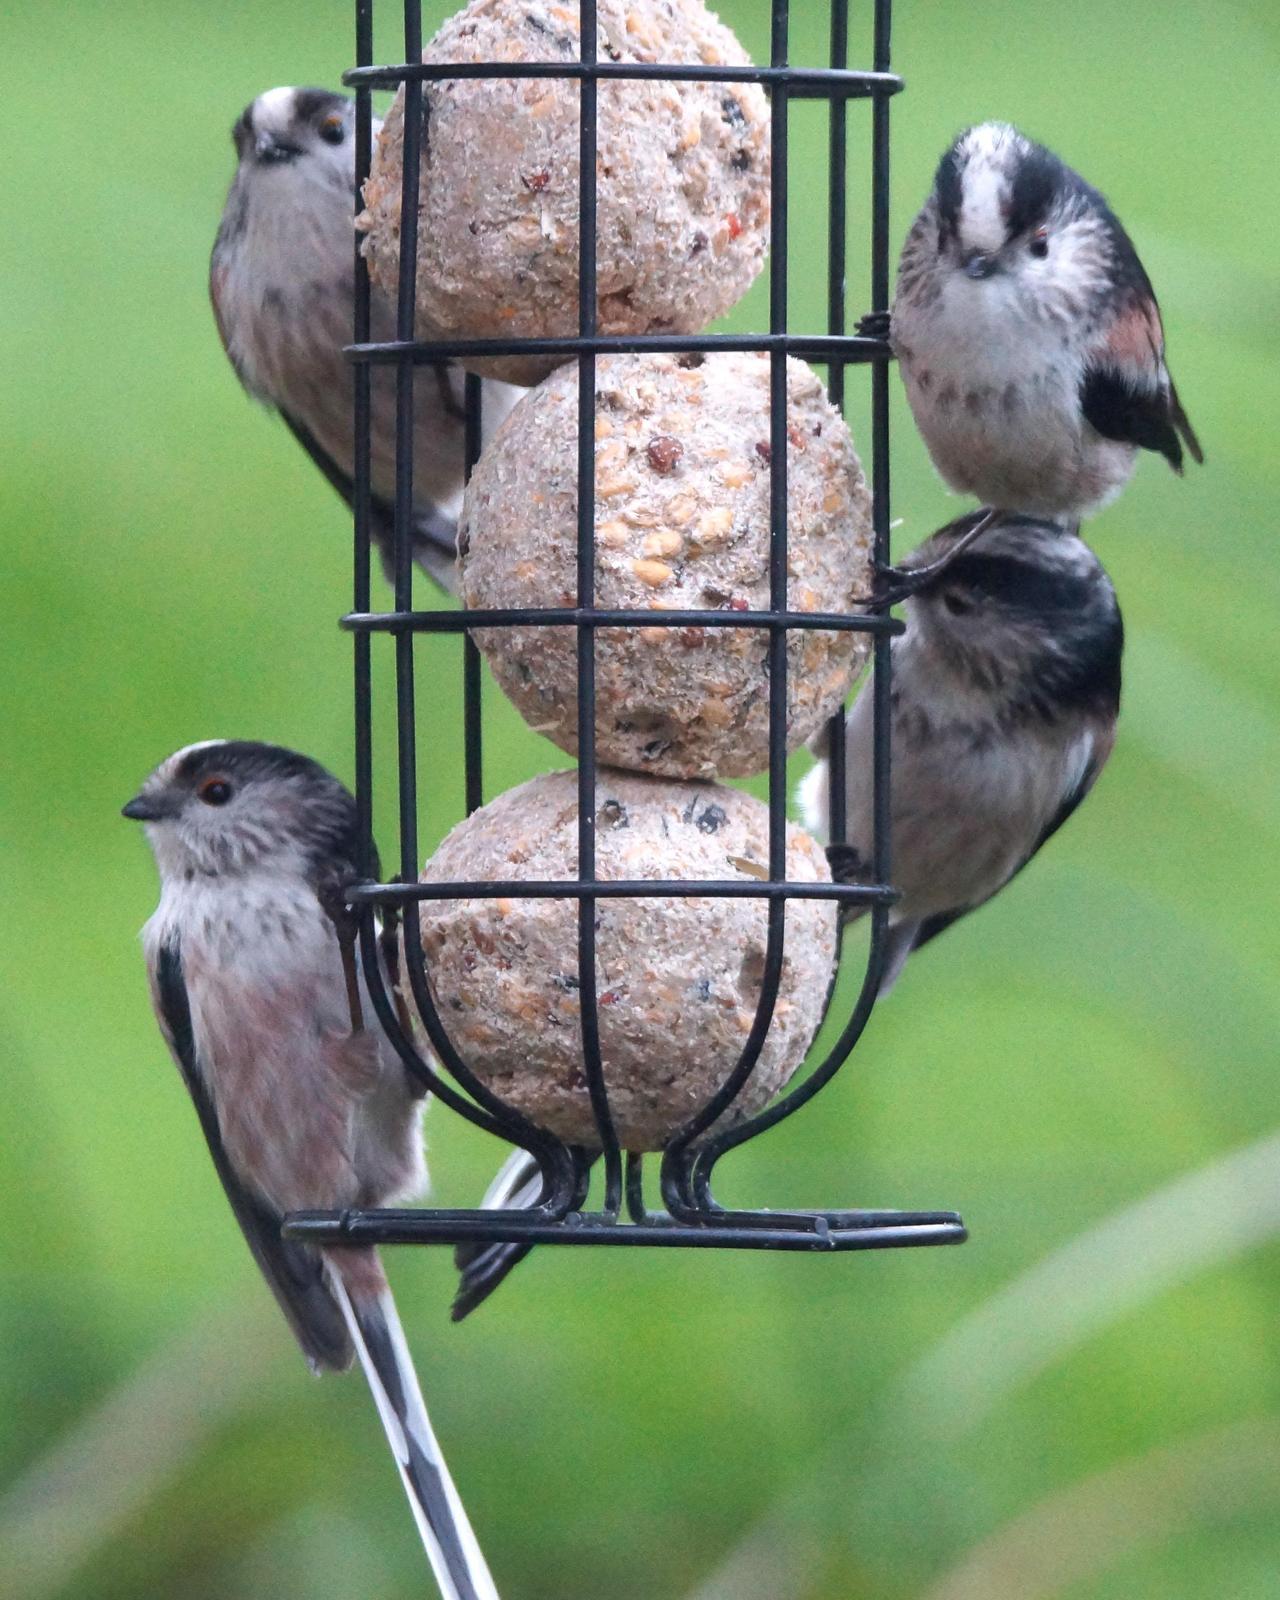 Long-tailed Tit Photo by Steve Percival